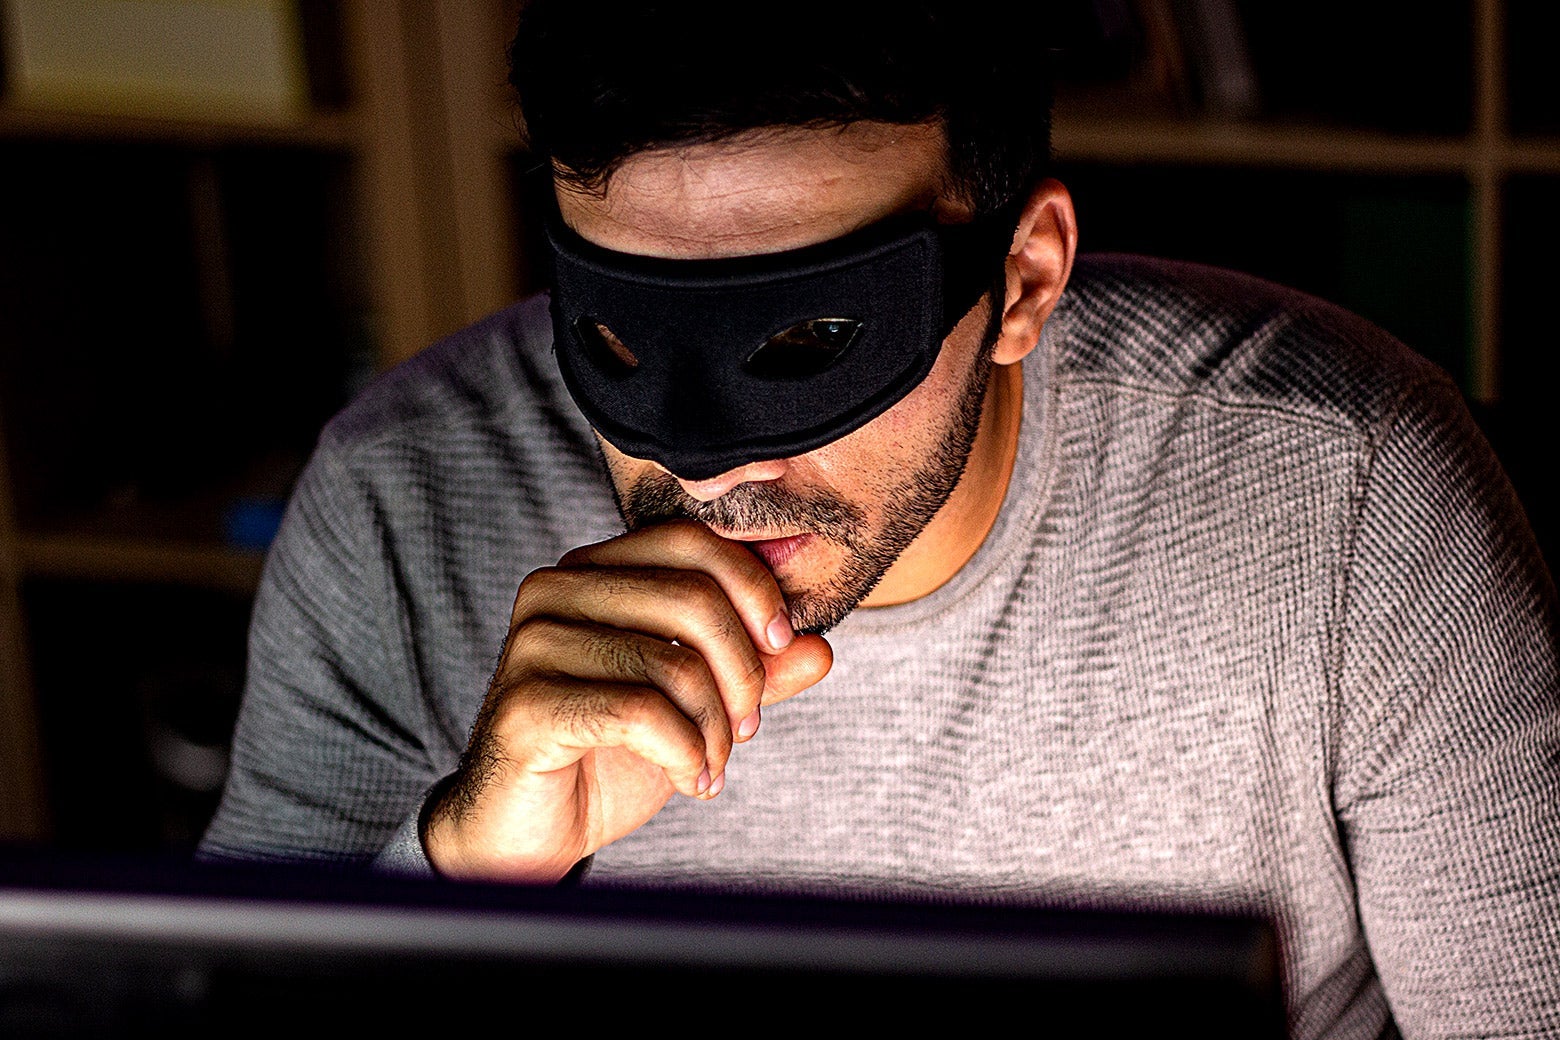 A man in an eye mask looks at a laptop screen with his hand on his mouth.